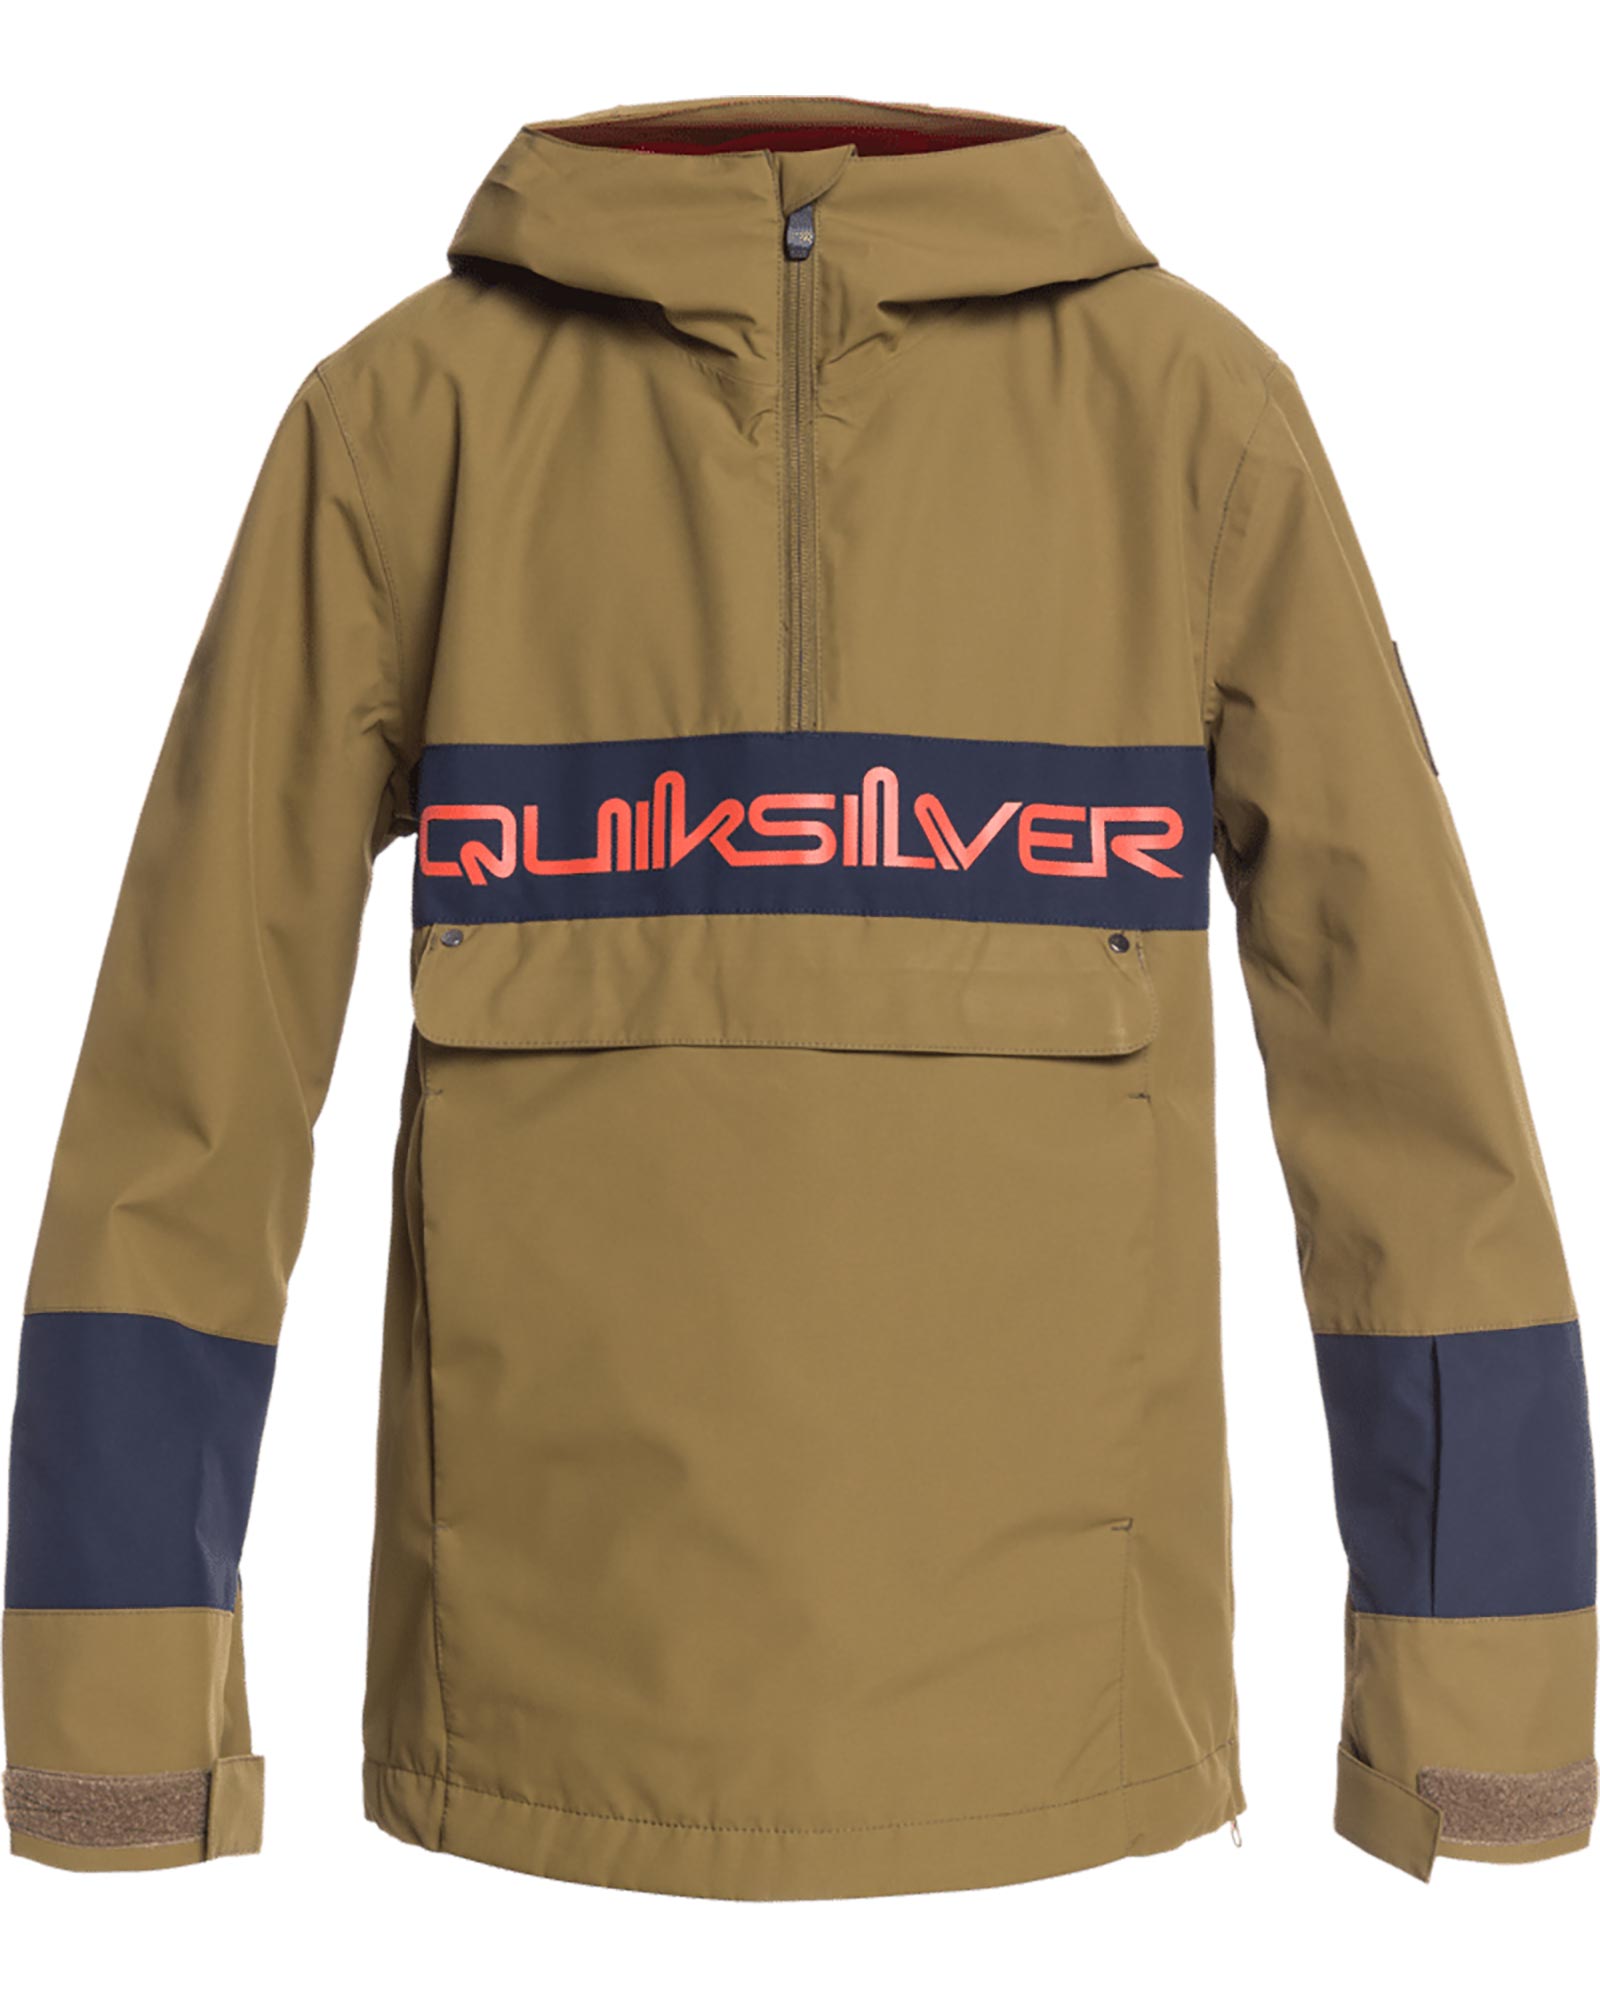 Quiksilver Steeze Boys’ Jacket - Military Olive 8 Years